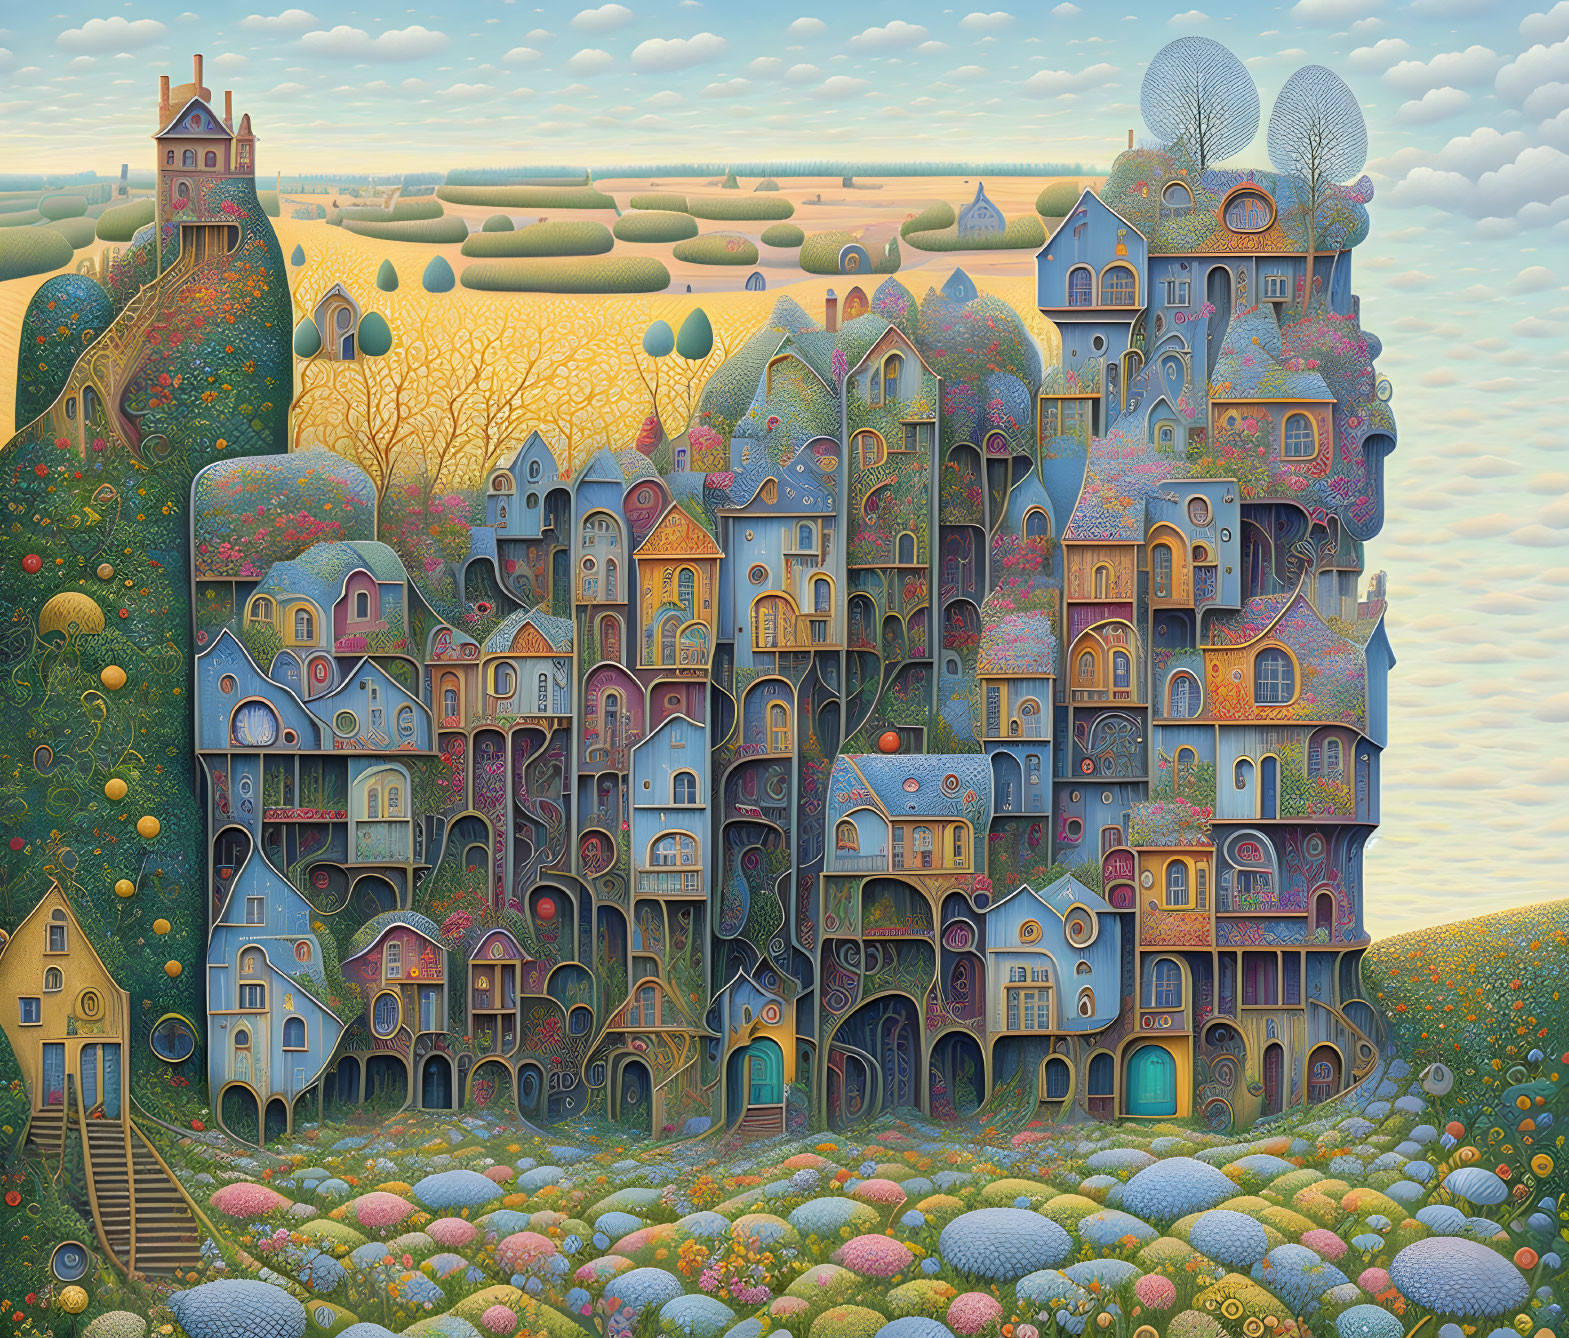 Detailed Whimsical Artwork of Fantastical Village with Unique Buildings